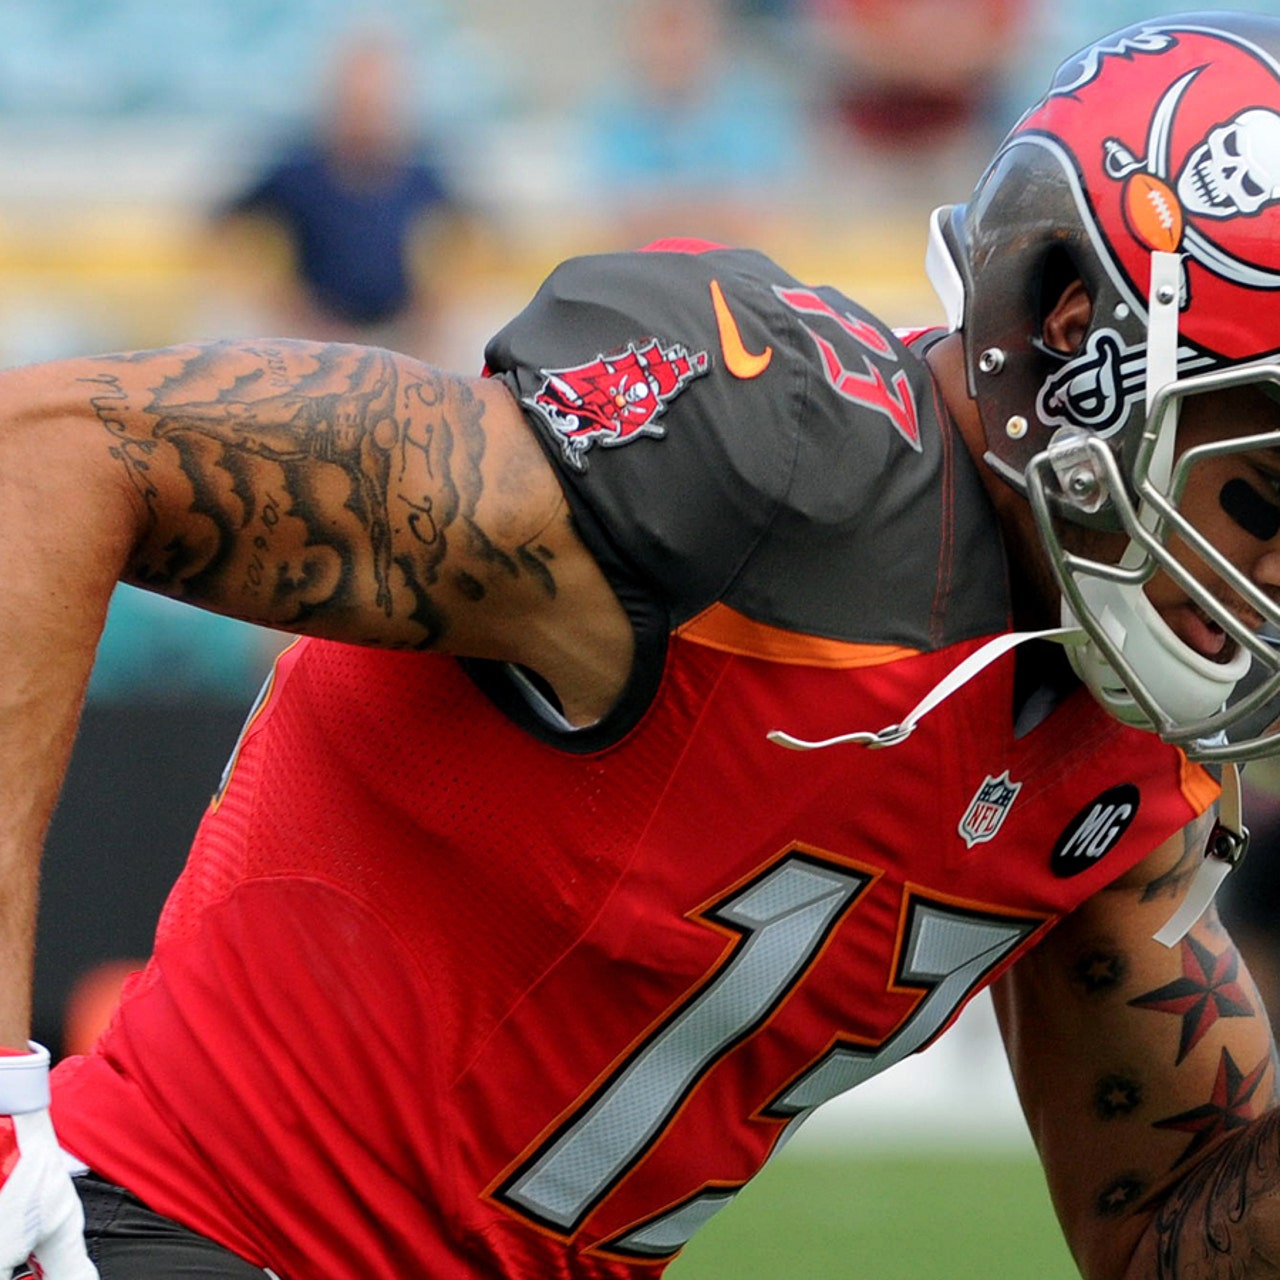 Mike Evans gets awesome tattoo to commemorate his move to the NFL (PHOTO)